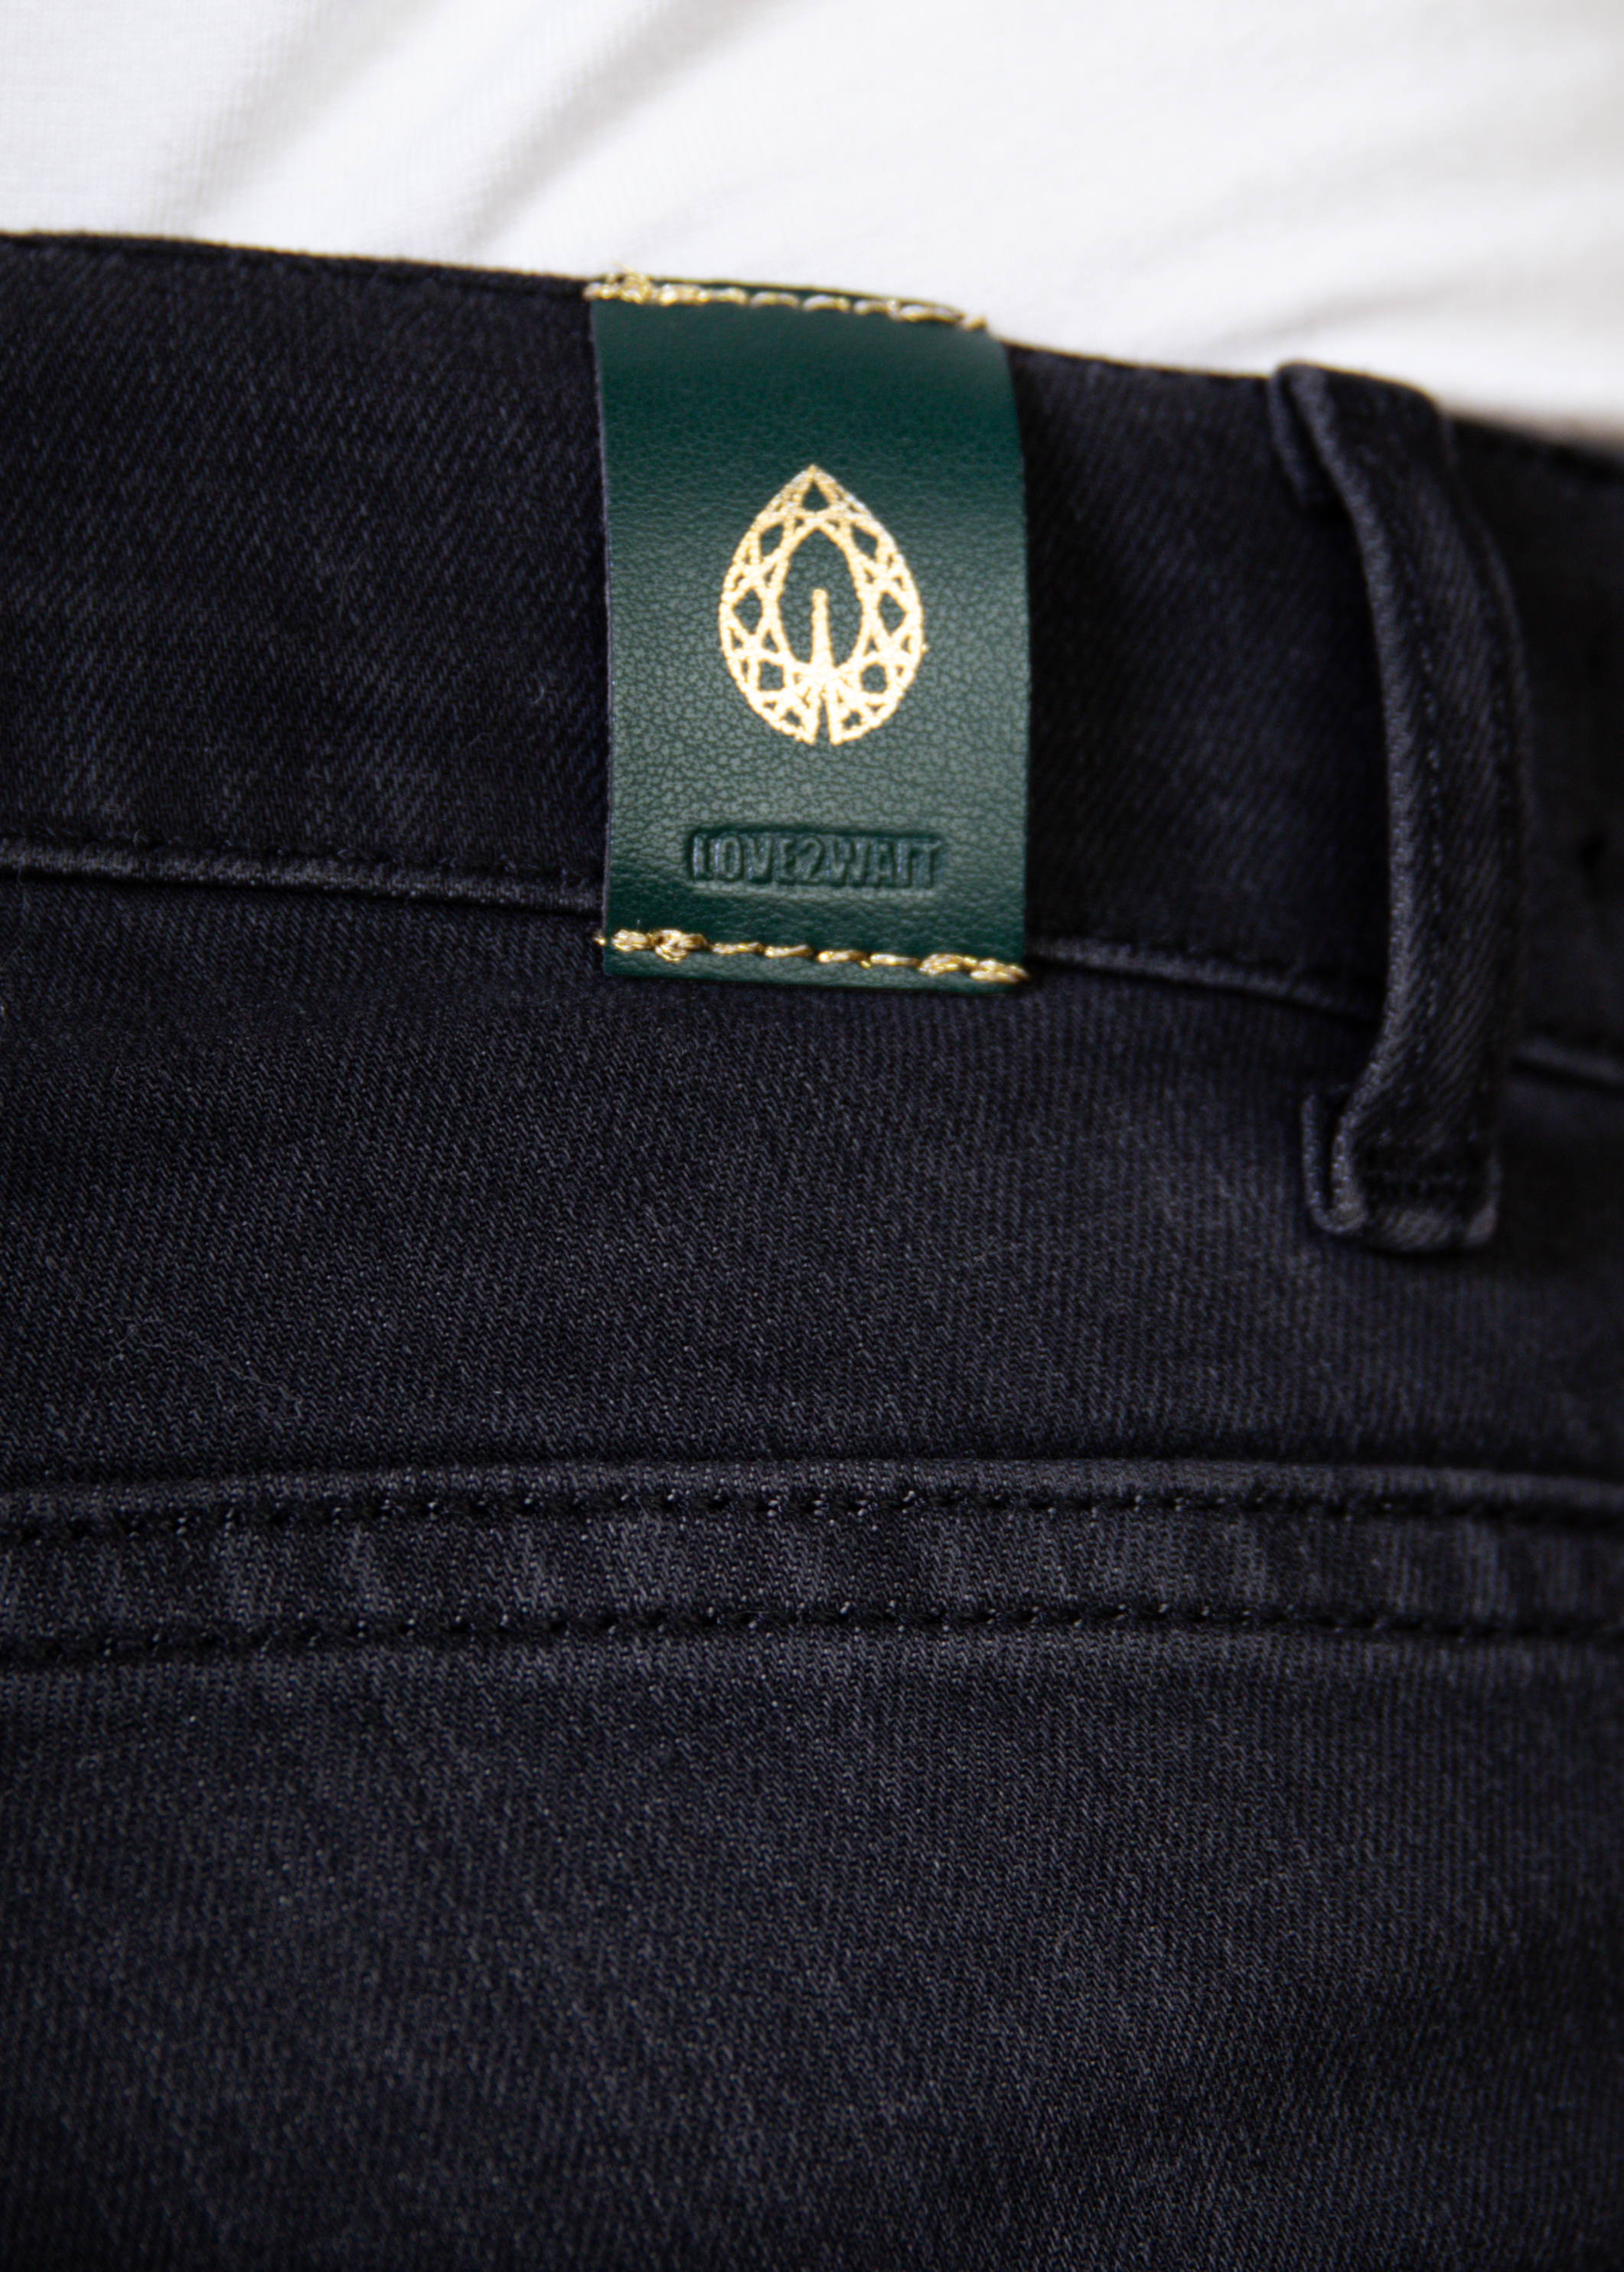 Umstandsjeans Straight Unterbauch Emerald charcoal